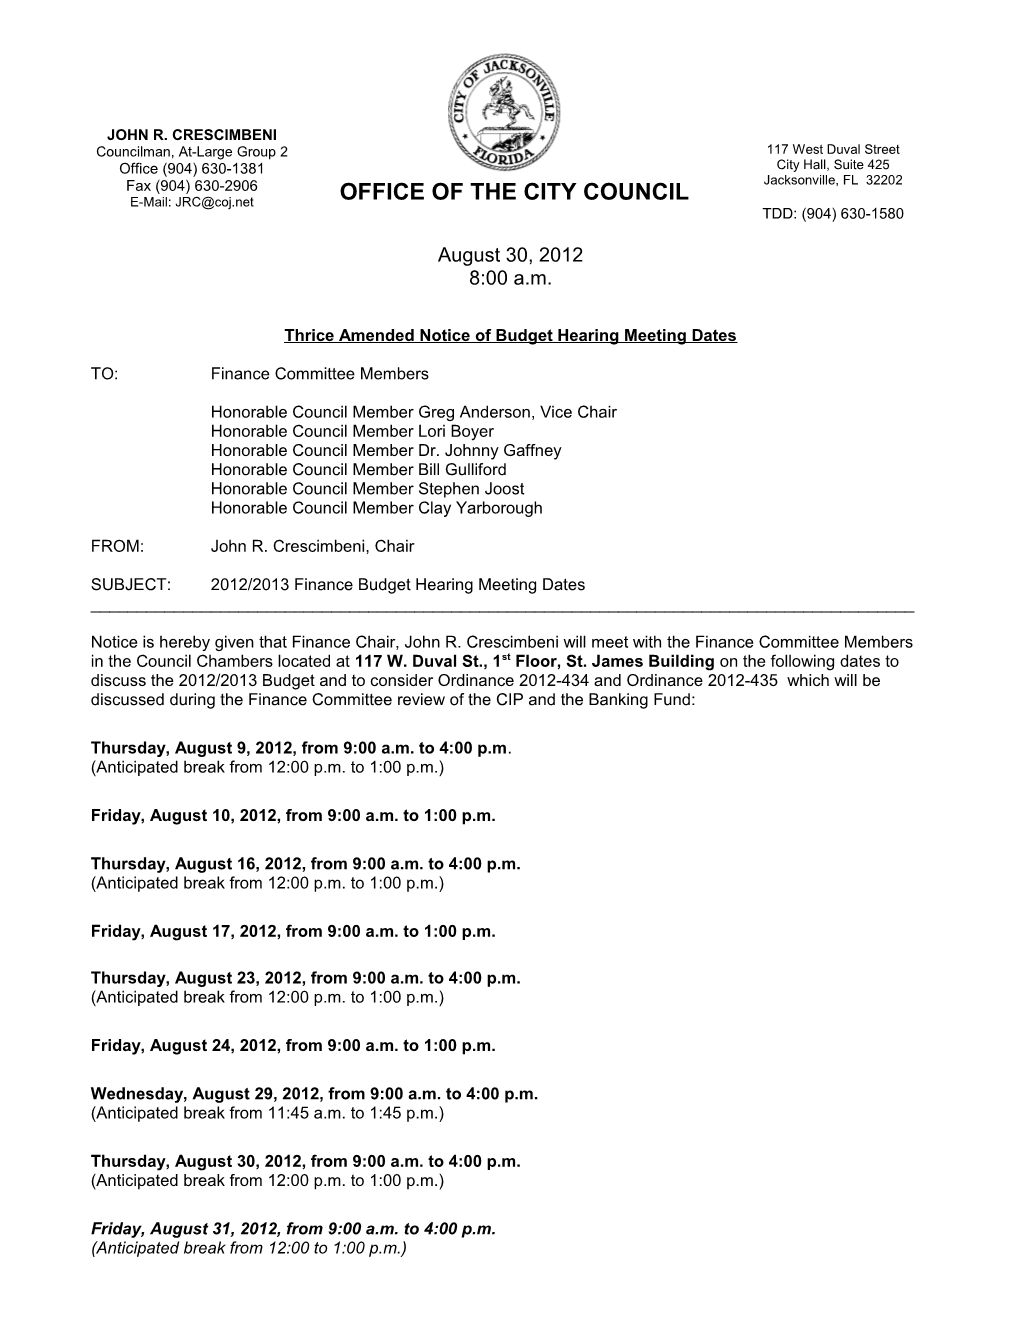 Thrice Amended Notice of Budget Hearing Meeting Dates